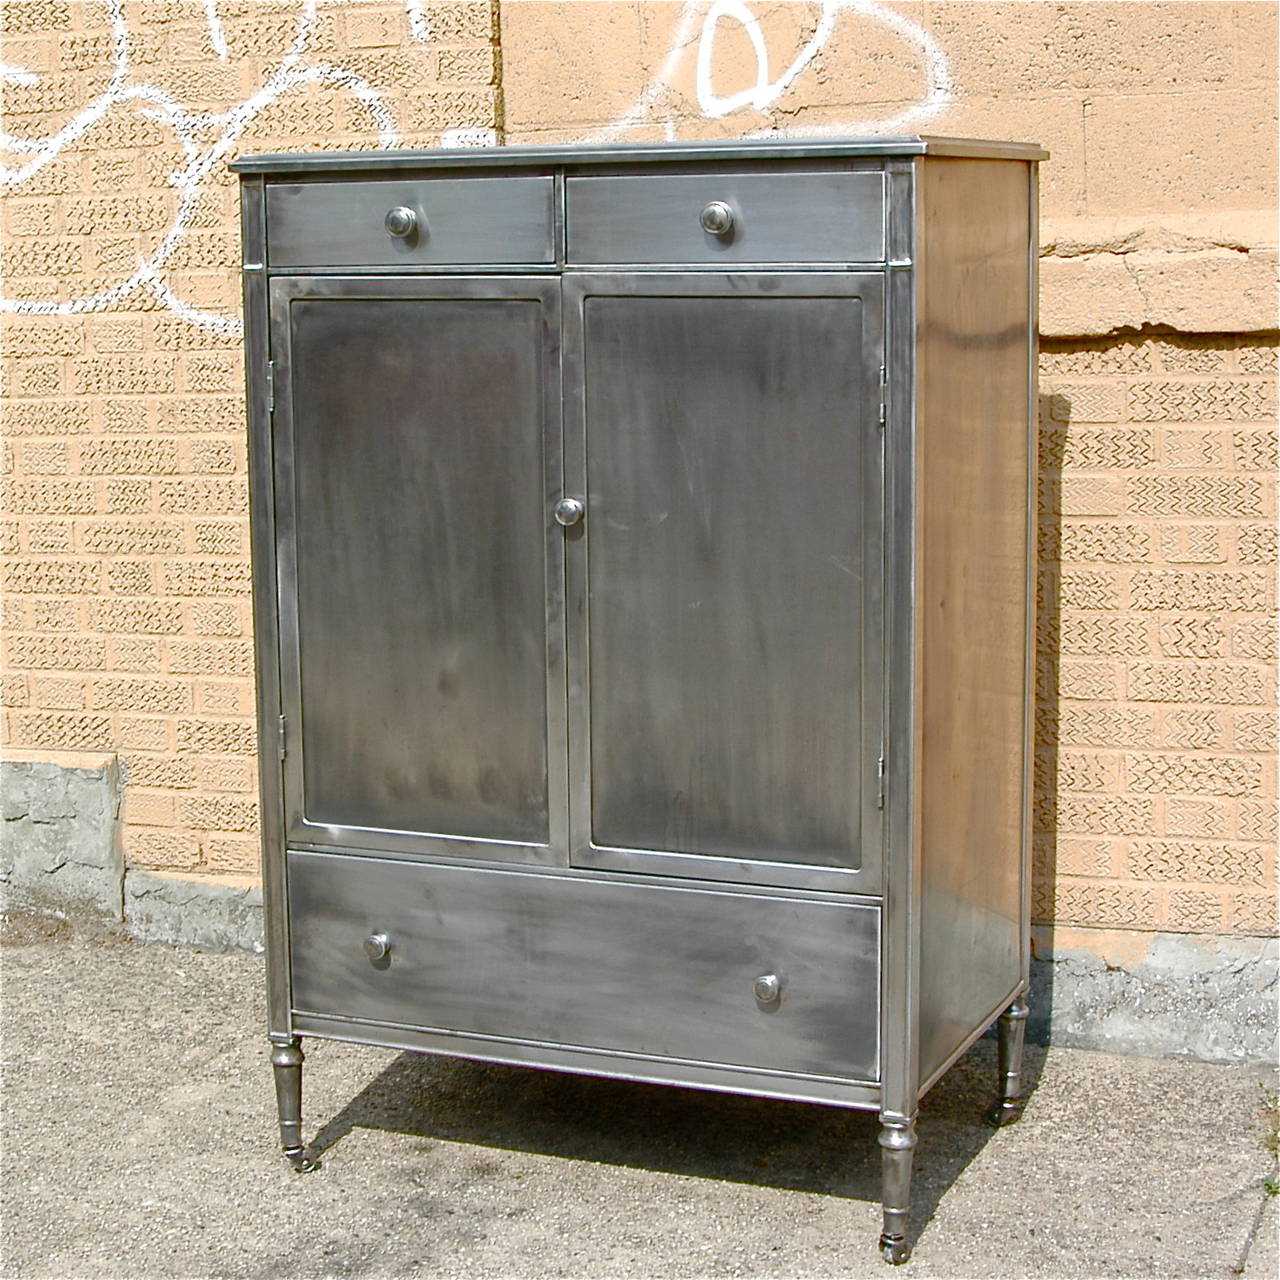 Rare, 1920's, brushed steel, gentleman’s chest by Simmons And Company offers hidden multiple storage drawers